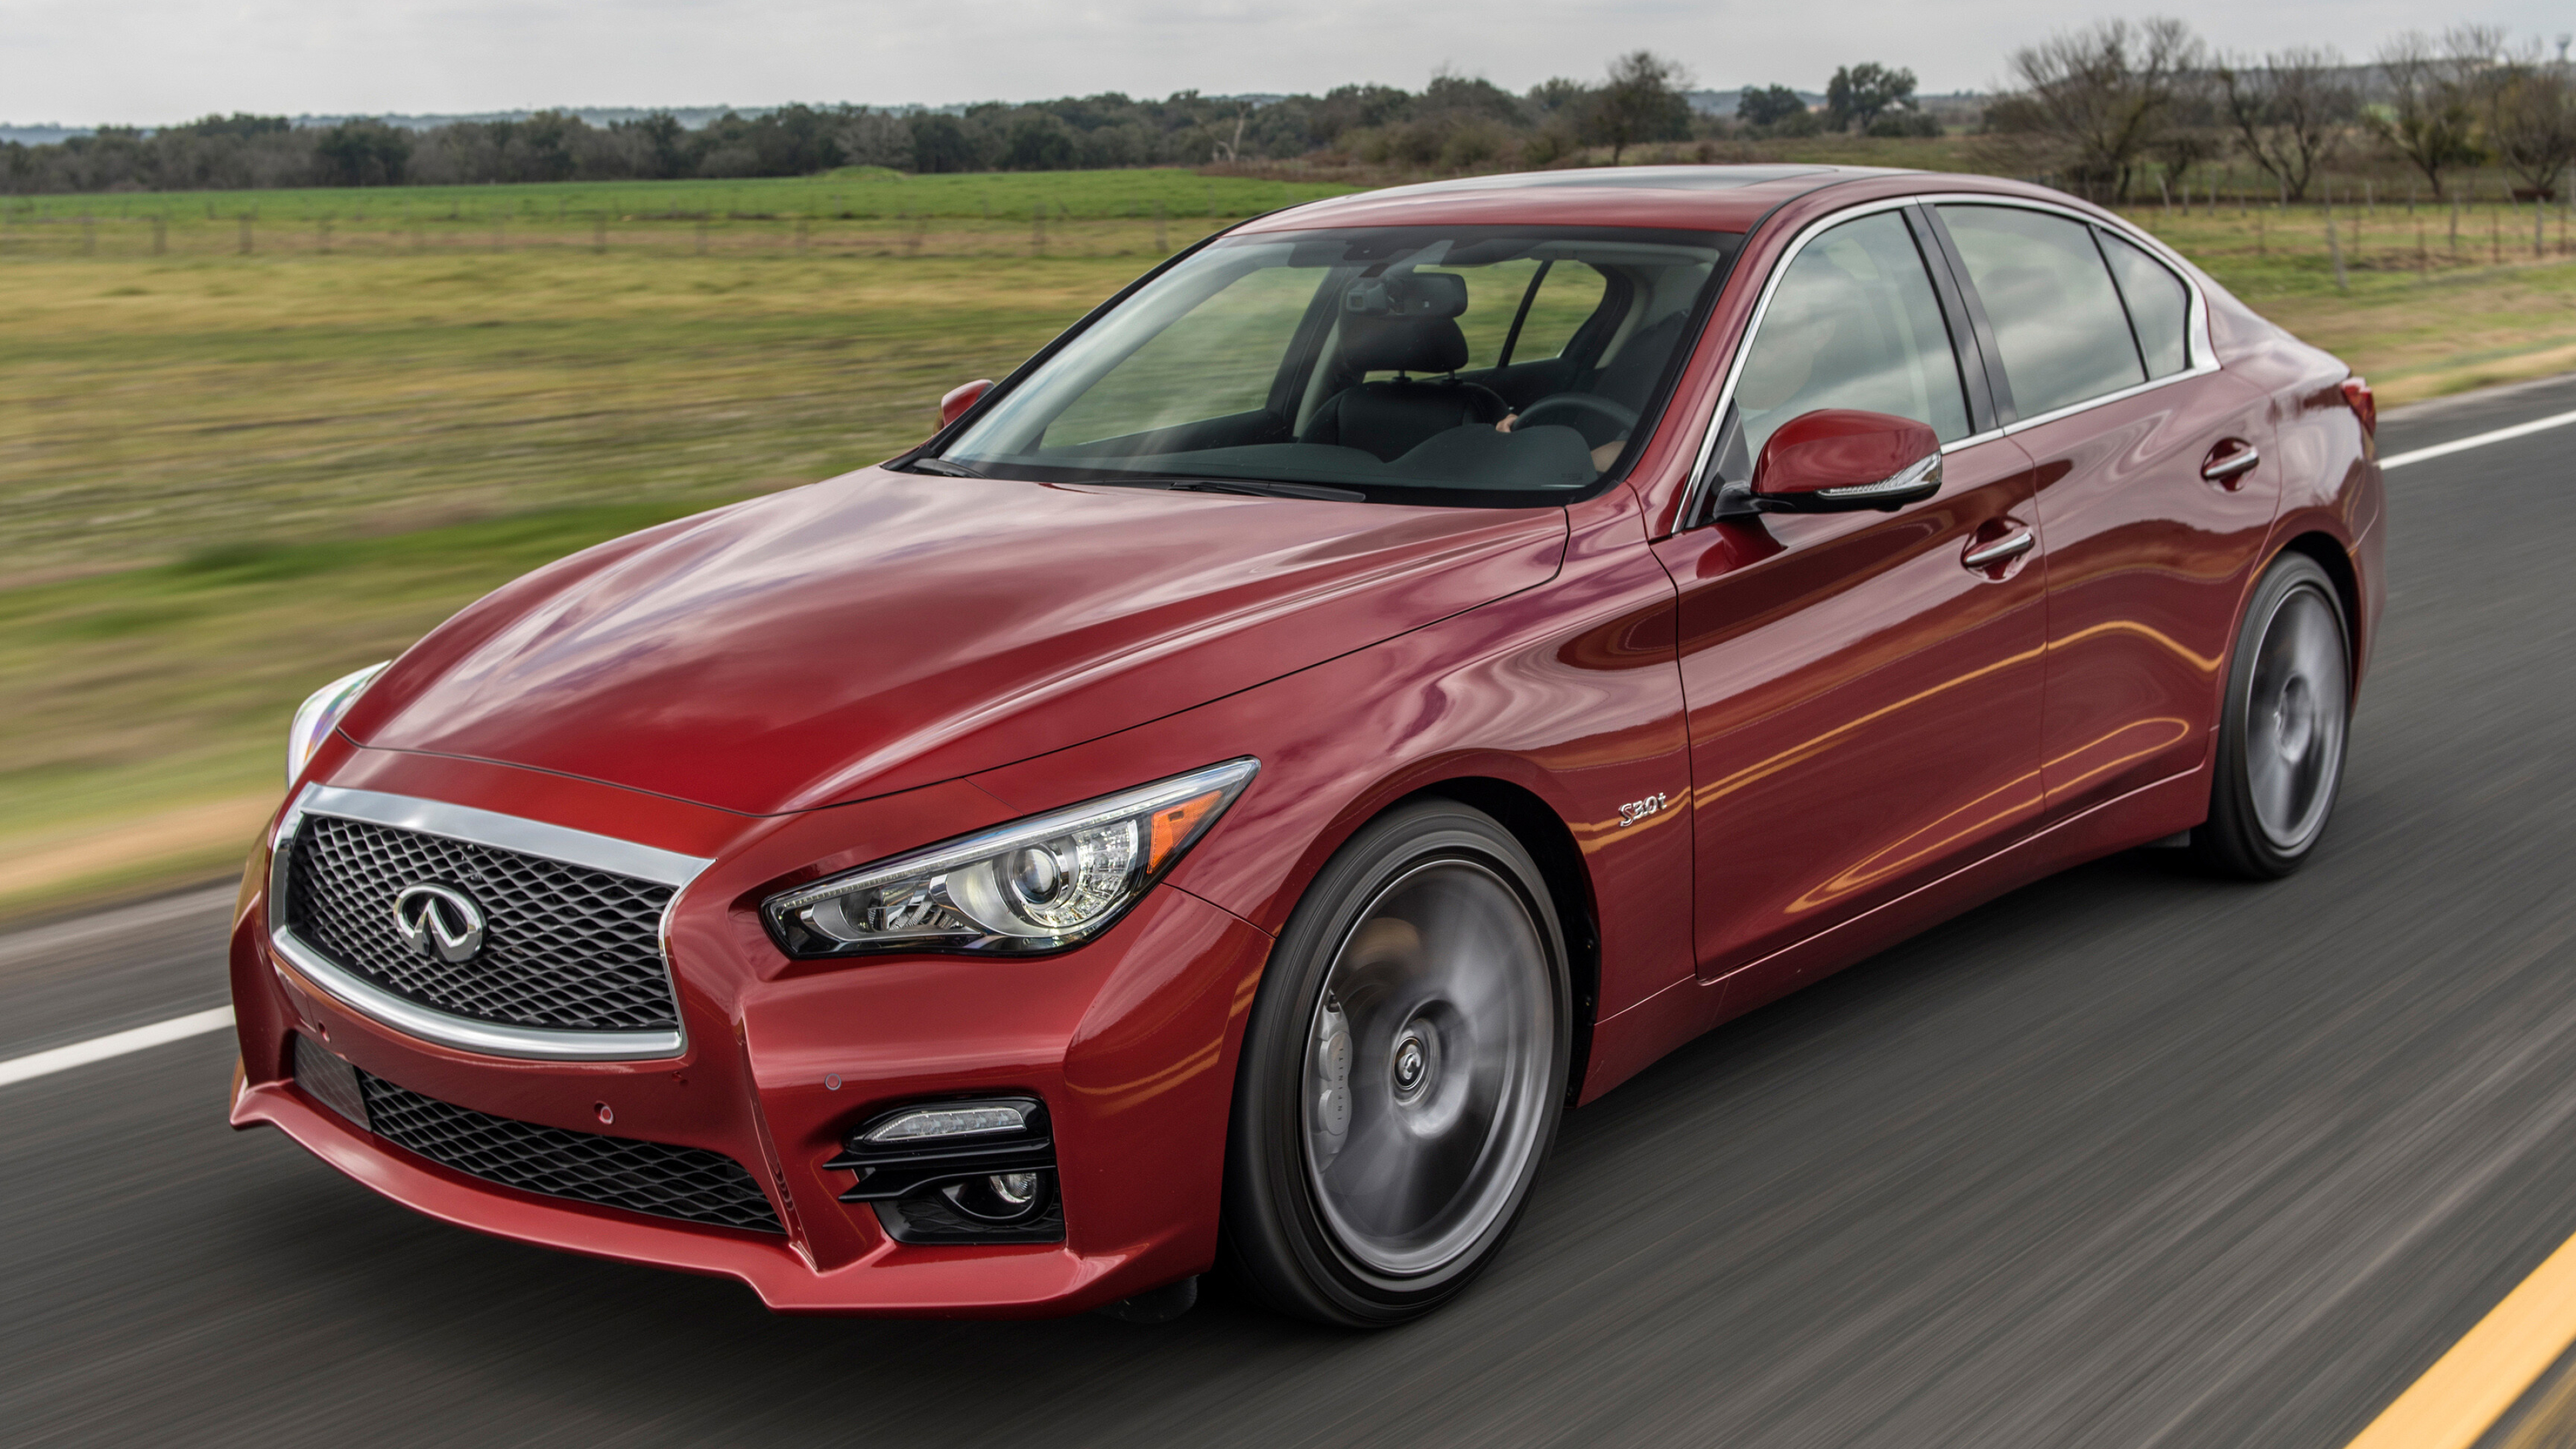 Infiniti: Q50, A compact executive car manufactured by Nissan. 3840x2160 4K Background.